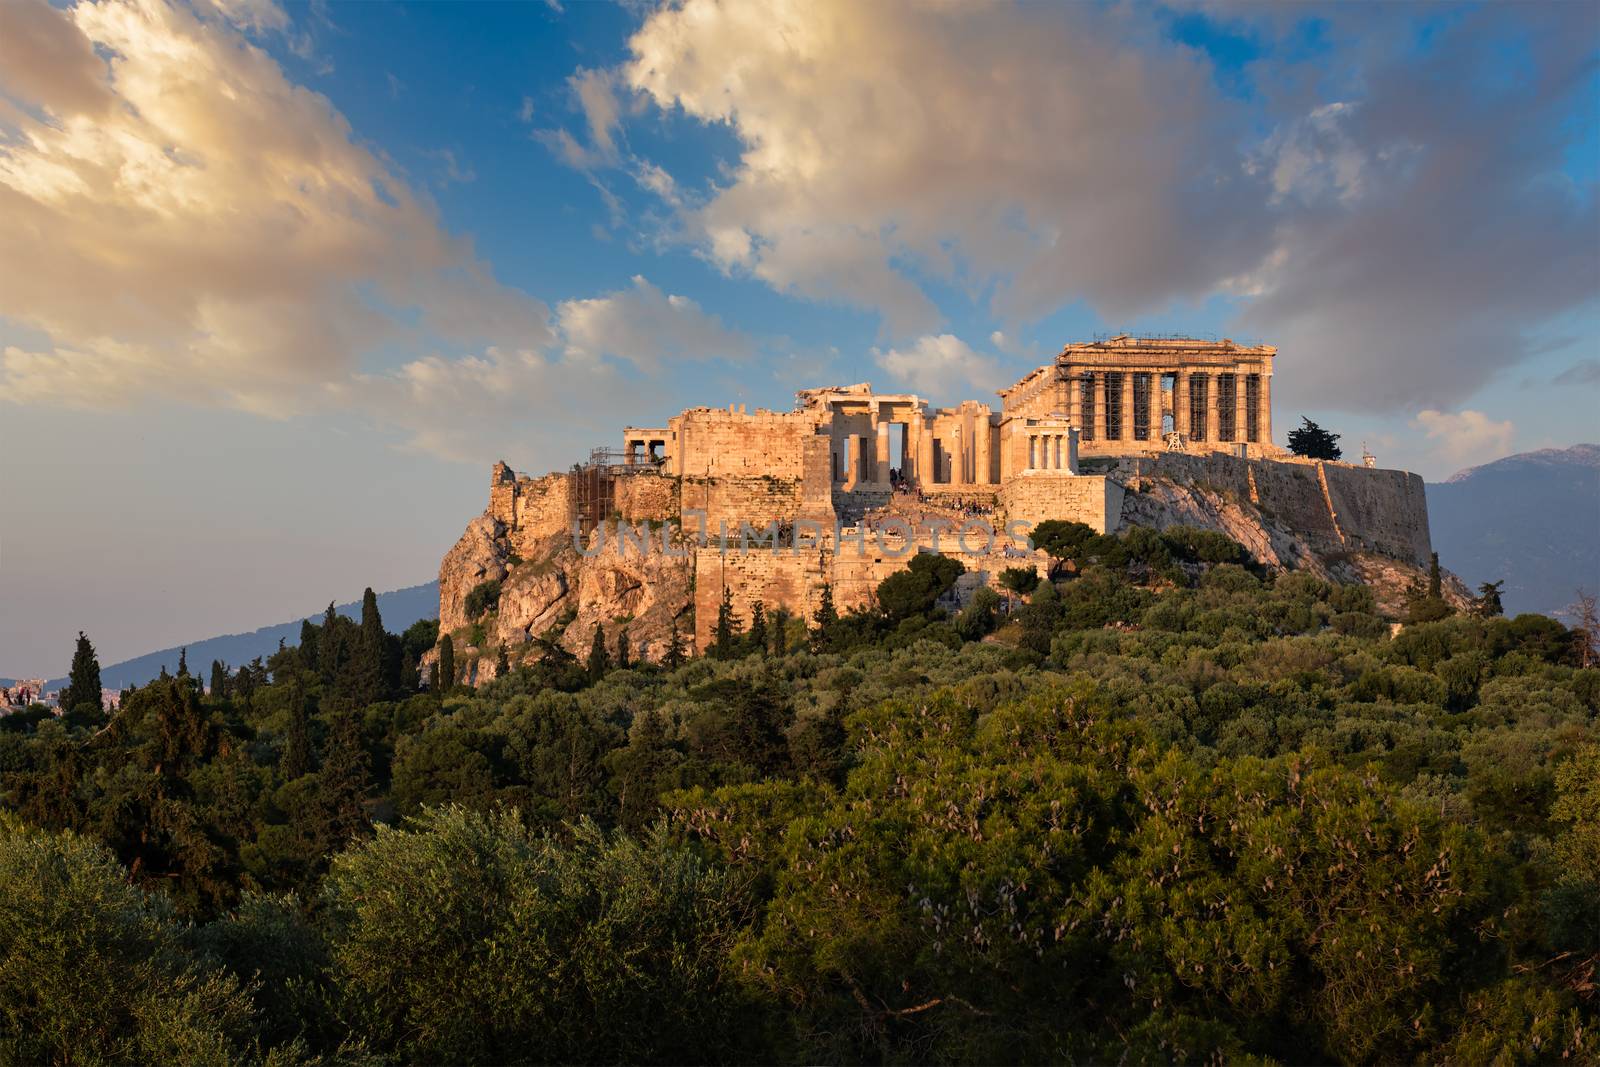 Iconic Parthenon Temple at the Acropolis of Athens, Greece by dimol